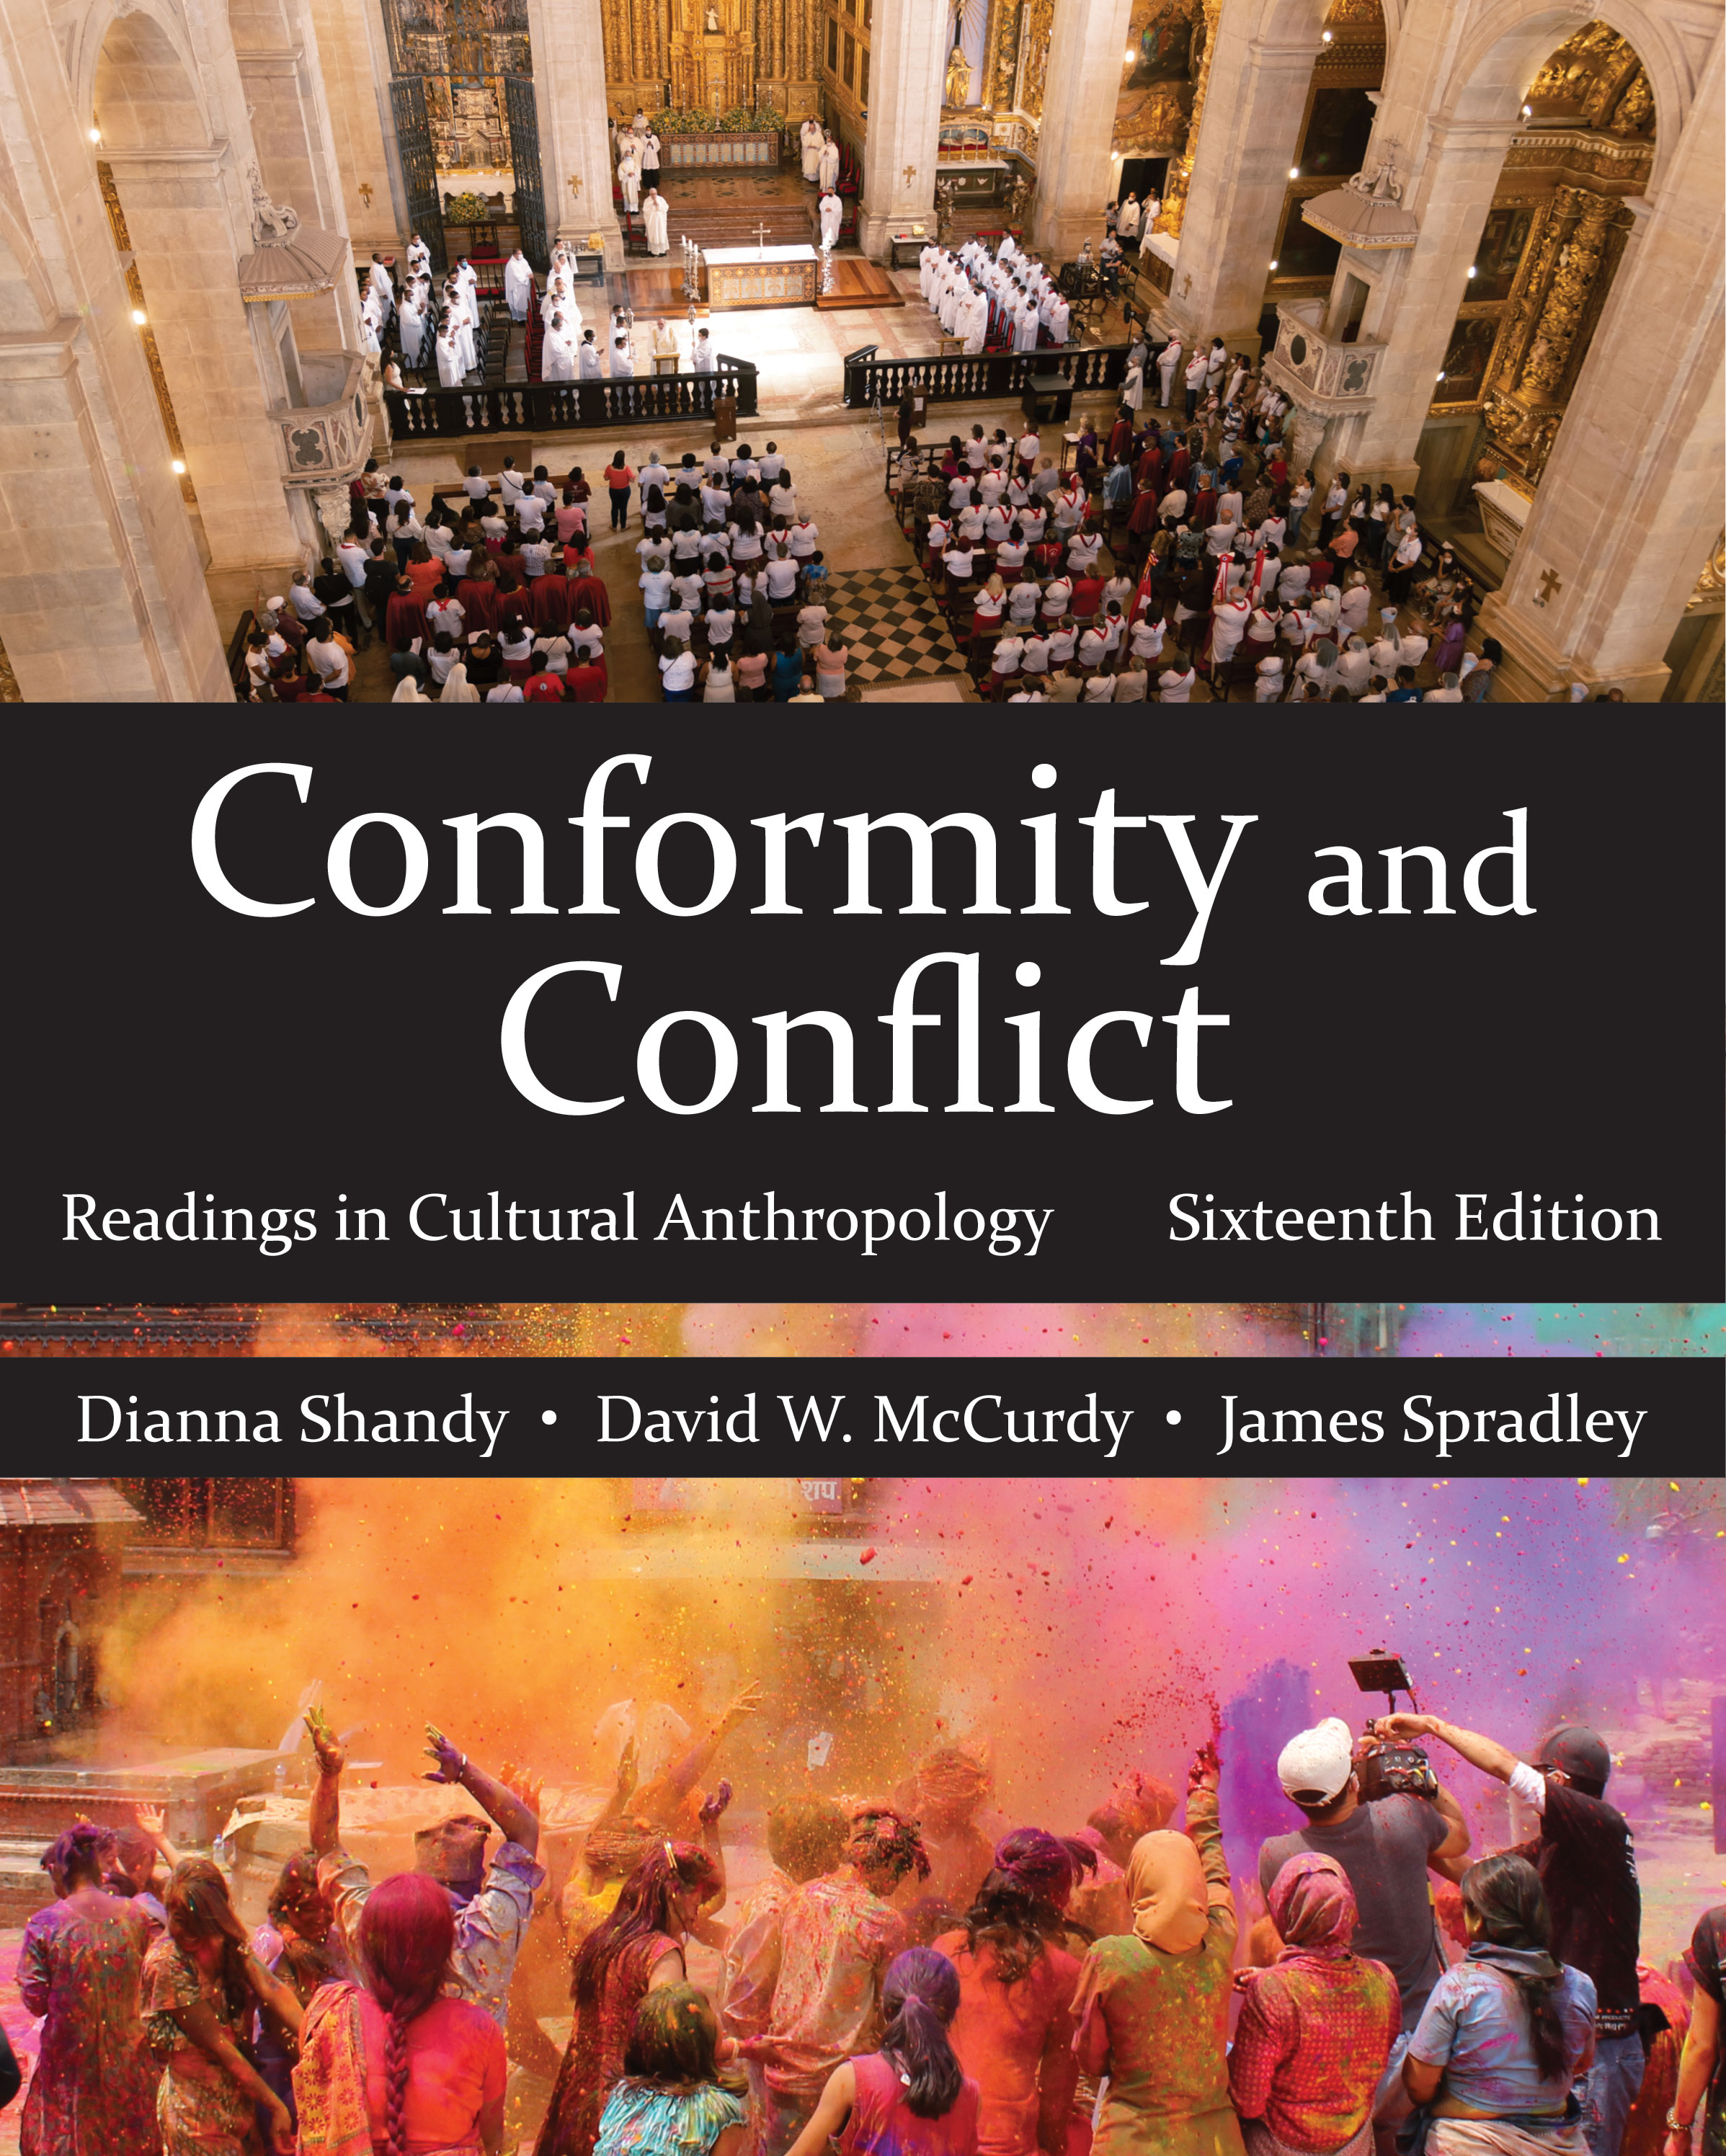 Conformity and Conflict: Readings in Cultural Anthropology by Dianna J. Shandy, David W. McCurdy, James P. Spradley